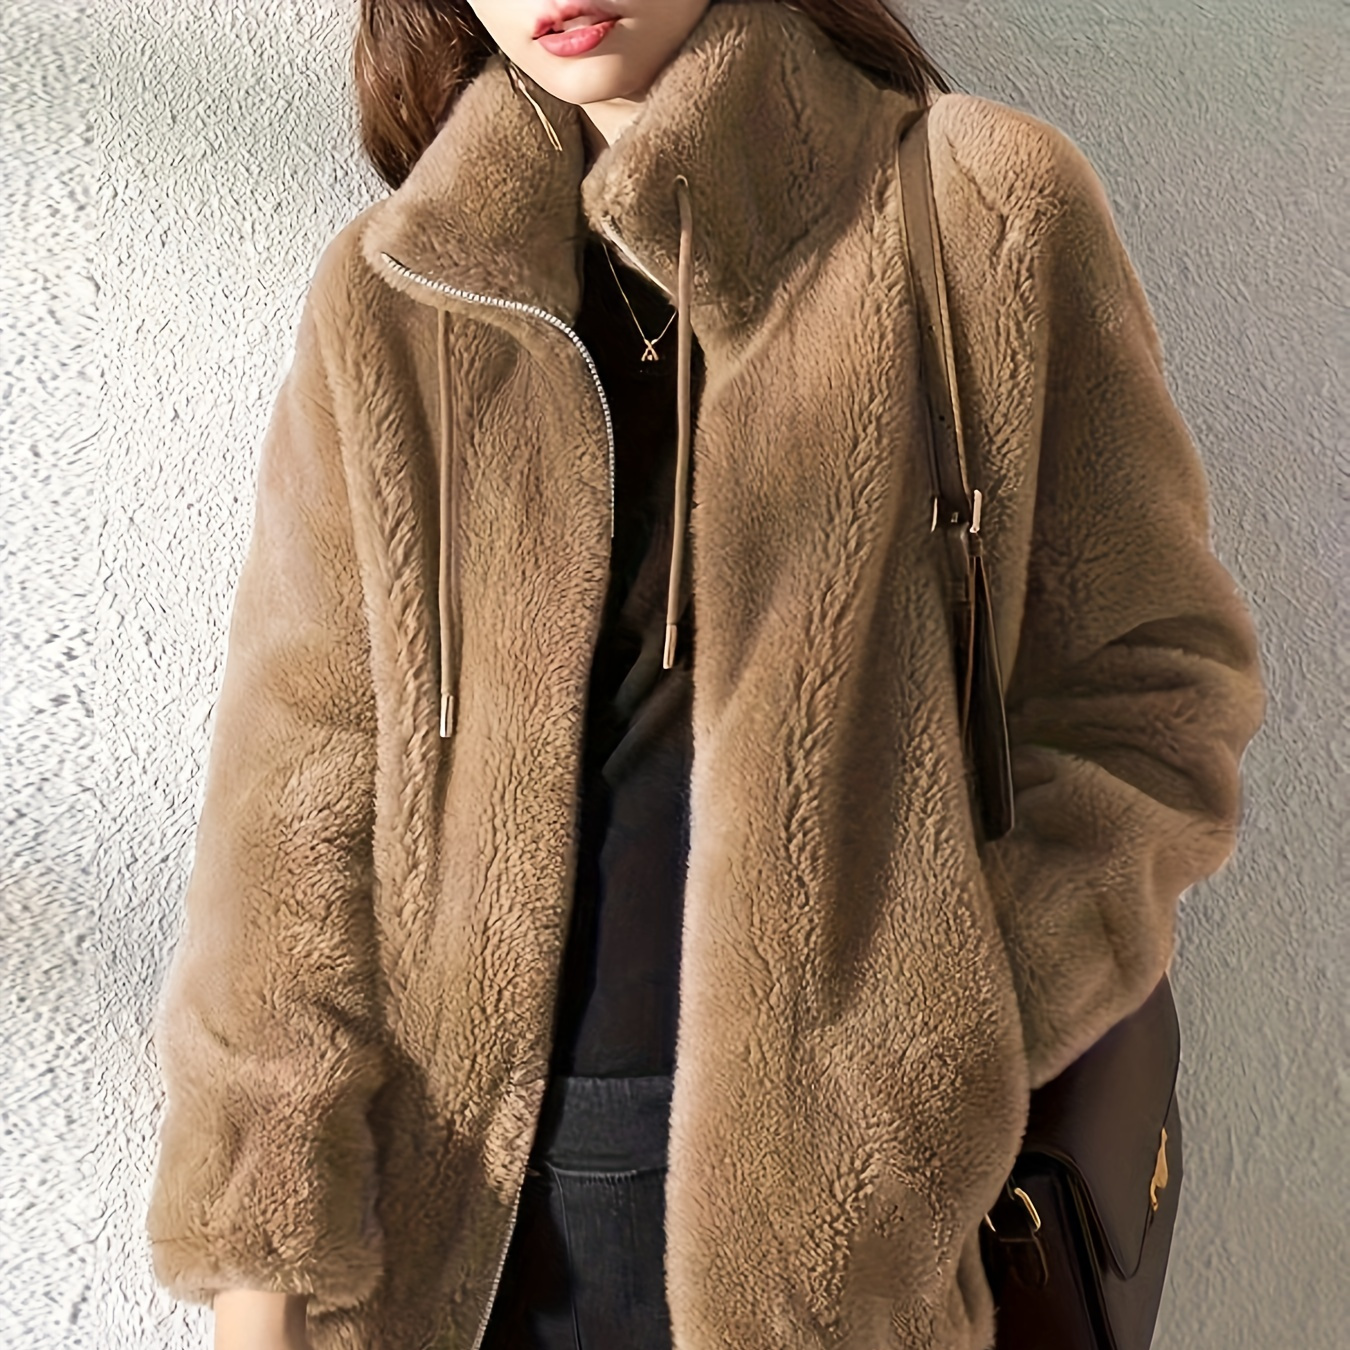 

Drawstring Teddy Coat, Casual Zip Up Long Sleeve Warm Outerwear, Women's Clothing